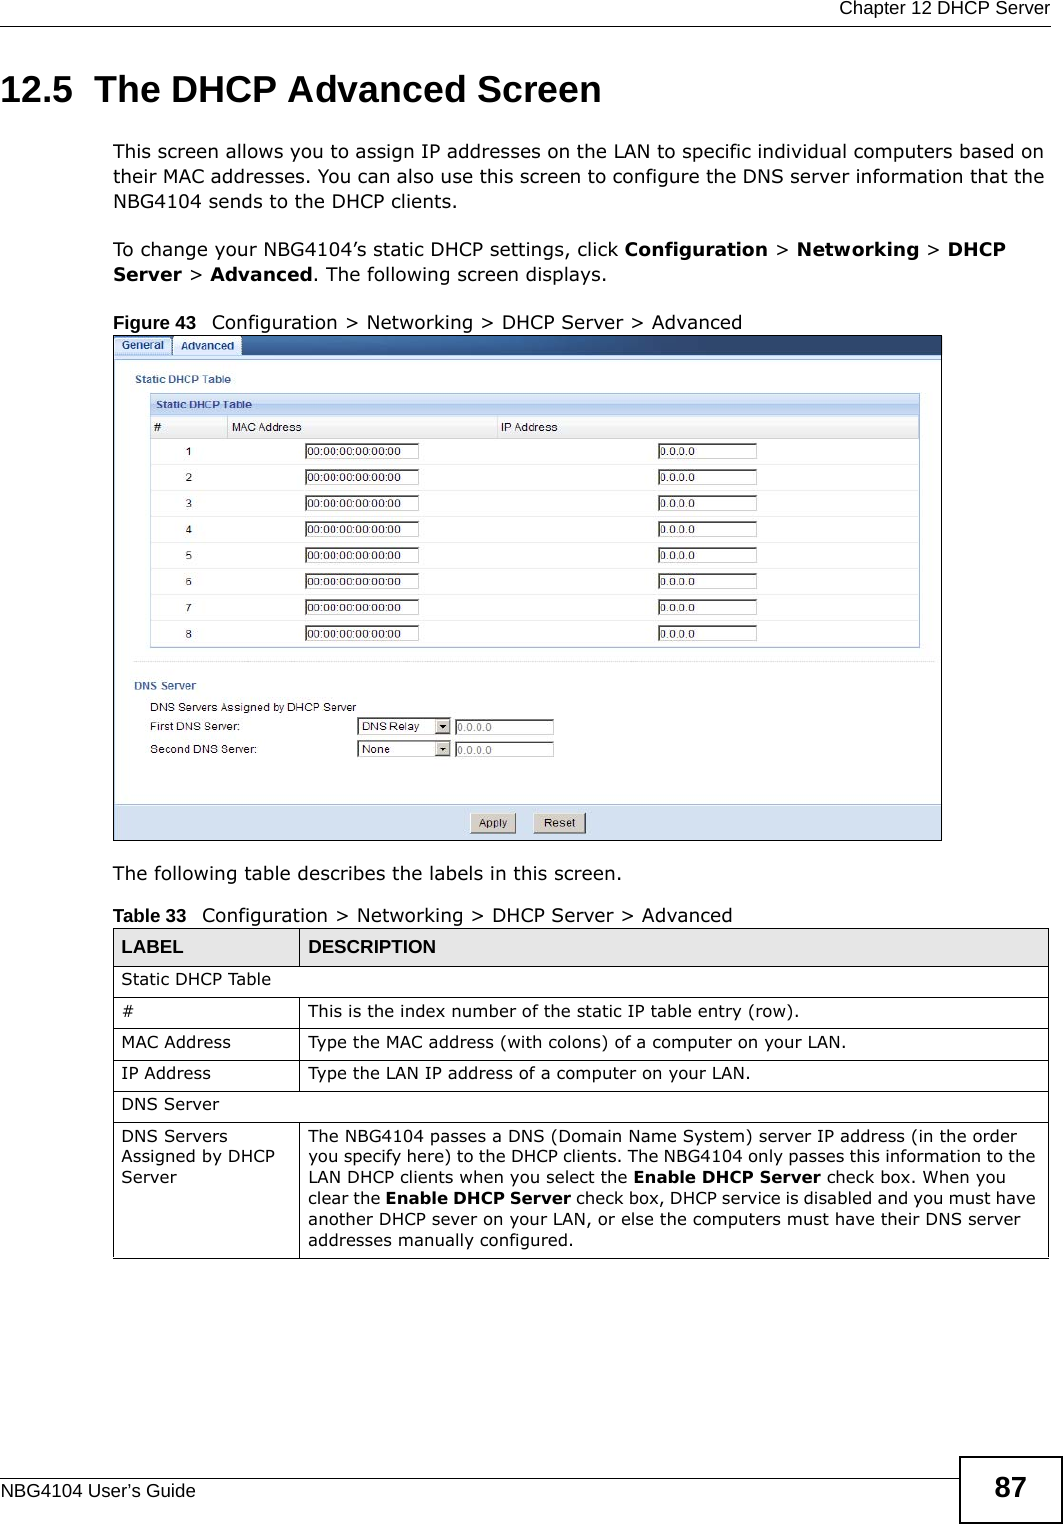  Chapter 12 DHCP ServerNBG4104 User’s Guide 8712.5  The DHCP Advanced Screen   This screen allows you to assign IP addresses on the LAN to specific individual computers based on their MAC addresses. You can also use this screen to configure the DNS server information that the NBG4104 sends to the DHCP clients.To change your NBG4104’s static DHCP settings, click Configuration &gt; Networking &gt; DHCP Server &gt; Advanced. The following screen displays.Figure 43   Configuration &gt; Networking &gt; DHCP Server &gt; Advanced The following table describes the labels in this screen.Table 33   Configuration &gt; Networking &gt; DHCP Server &gt; AdvancedLABEL DESCRIPTIONStatic DHCP Table# This is the index number of the static IP table entry (row).MAC Address Type the MAC address (with colons) of a computer on your LAN.IP Address Type the LAN IP address of a computer on your LAN.DNS ServerDNS Servers Assigned by DHCP Server The NBG4104 passes a DNS (Domain Name System) server IP address (in the order you specify here) to the DHCP clients. The NBG4104 only passes this information to the LAN DHCP clients when you select the Enable DHCP Server check box. When you clear the Enable DHCP Server check box, DHCP service is disabled and you must have another DHCP sever on your LAN, or else the computers must have their DNS server addresses manually configured.